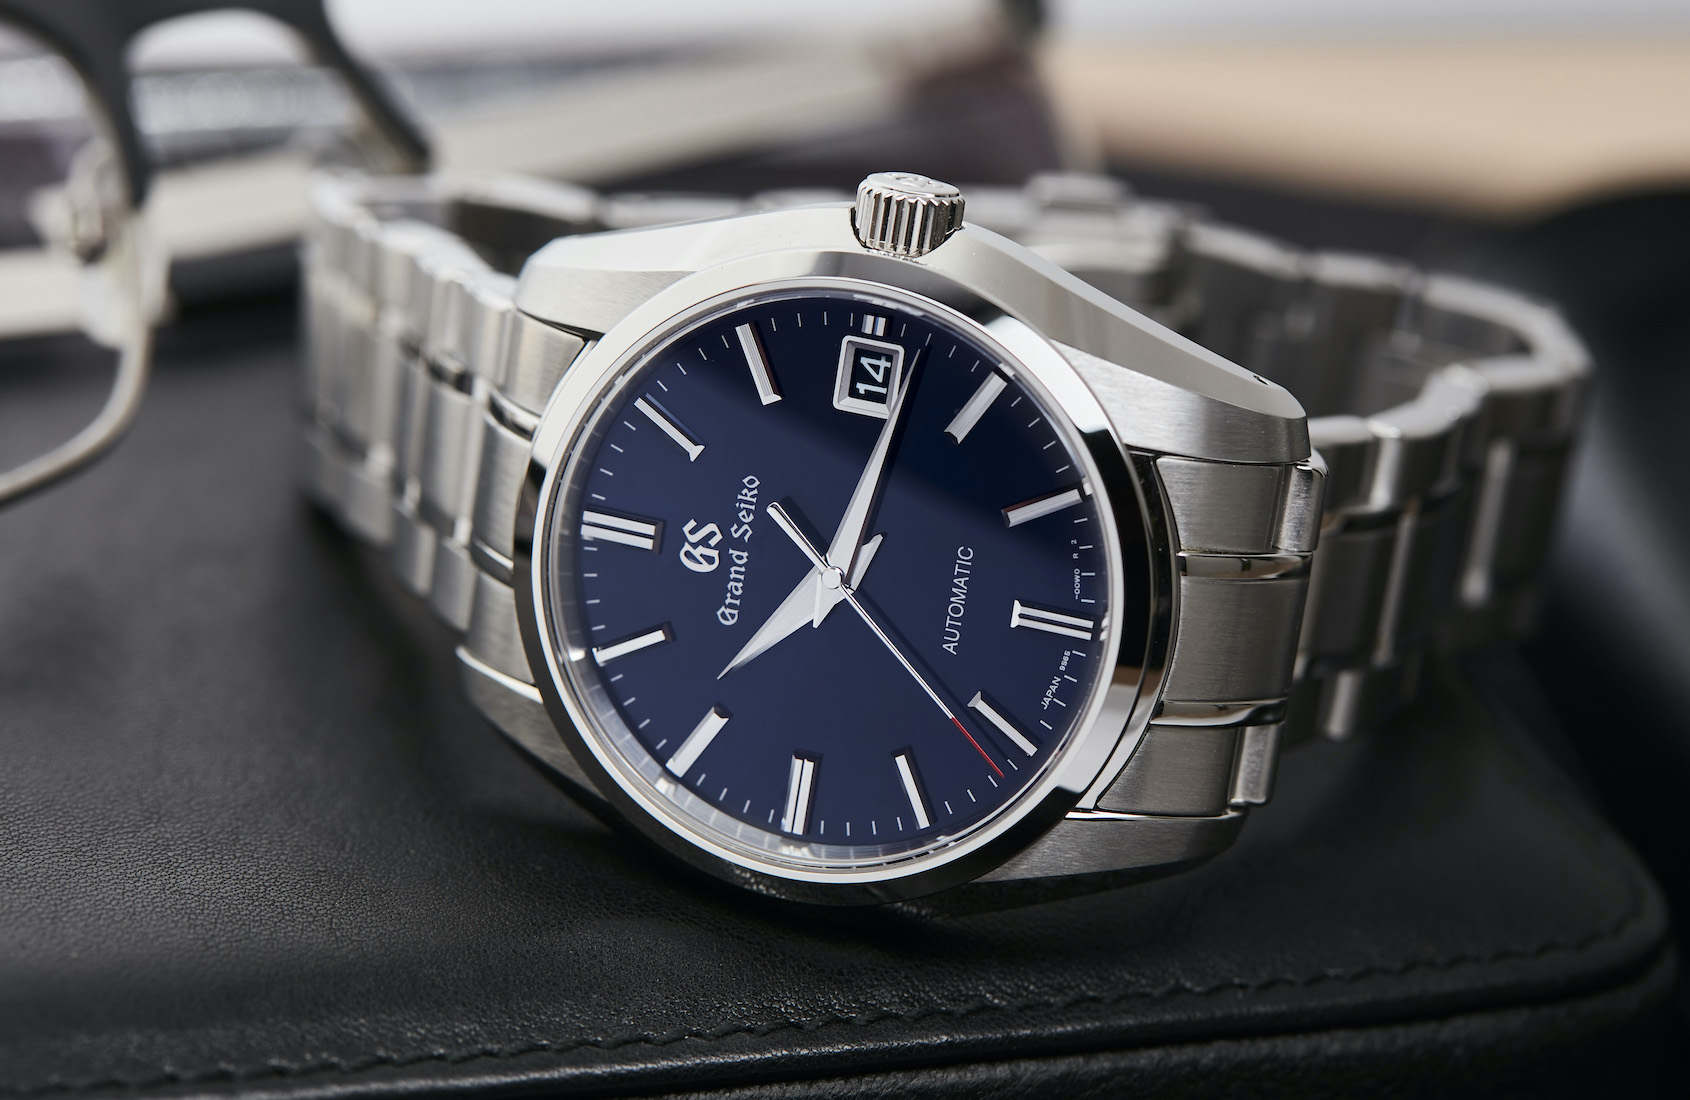 HANDS-ON: Is the Grand Seiko SBGR321 just another stainless-steel watch with a blue dial?